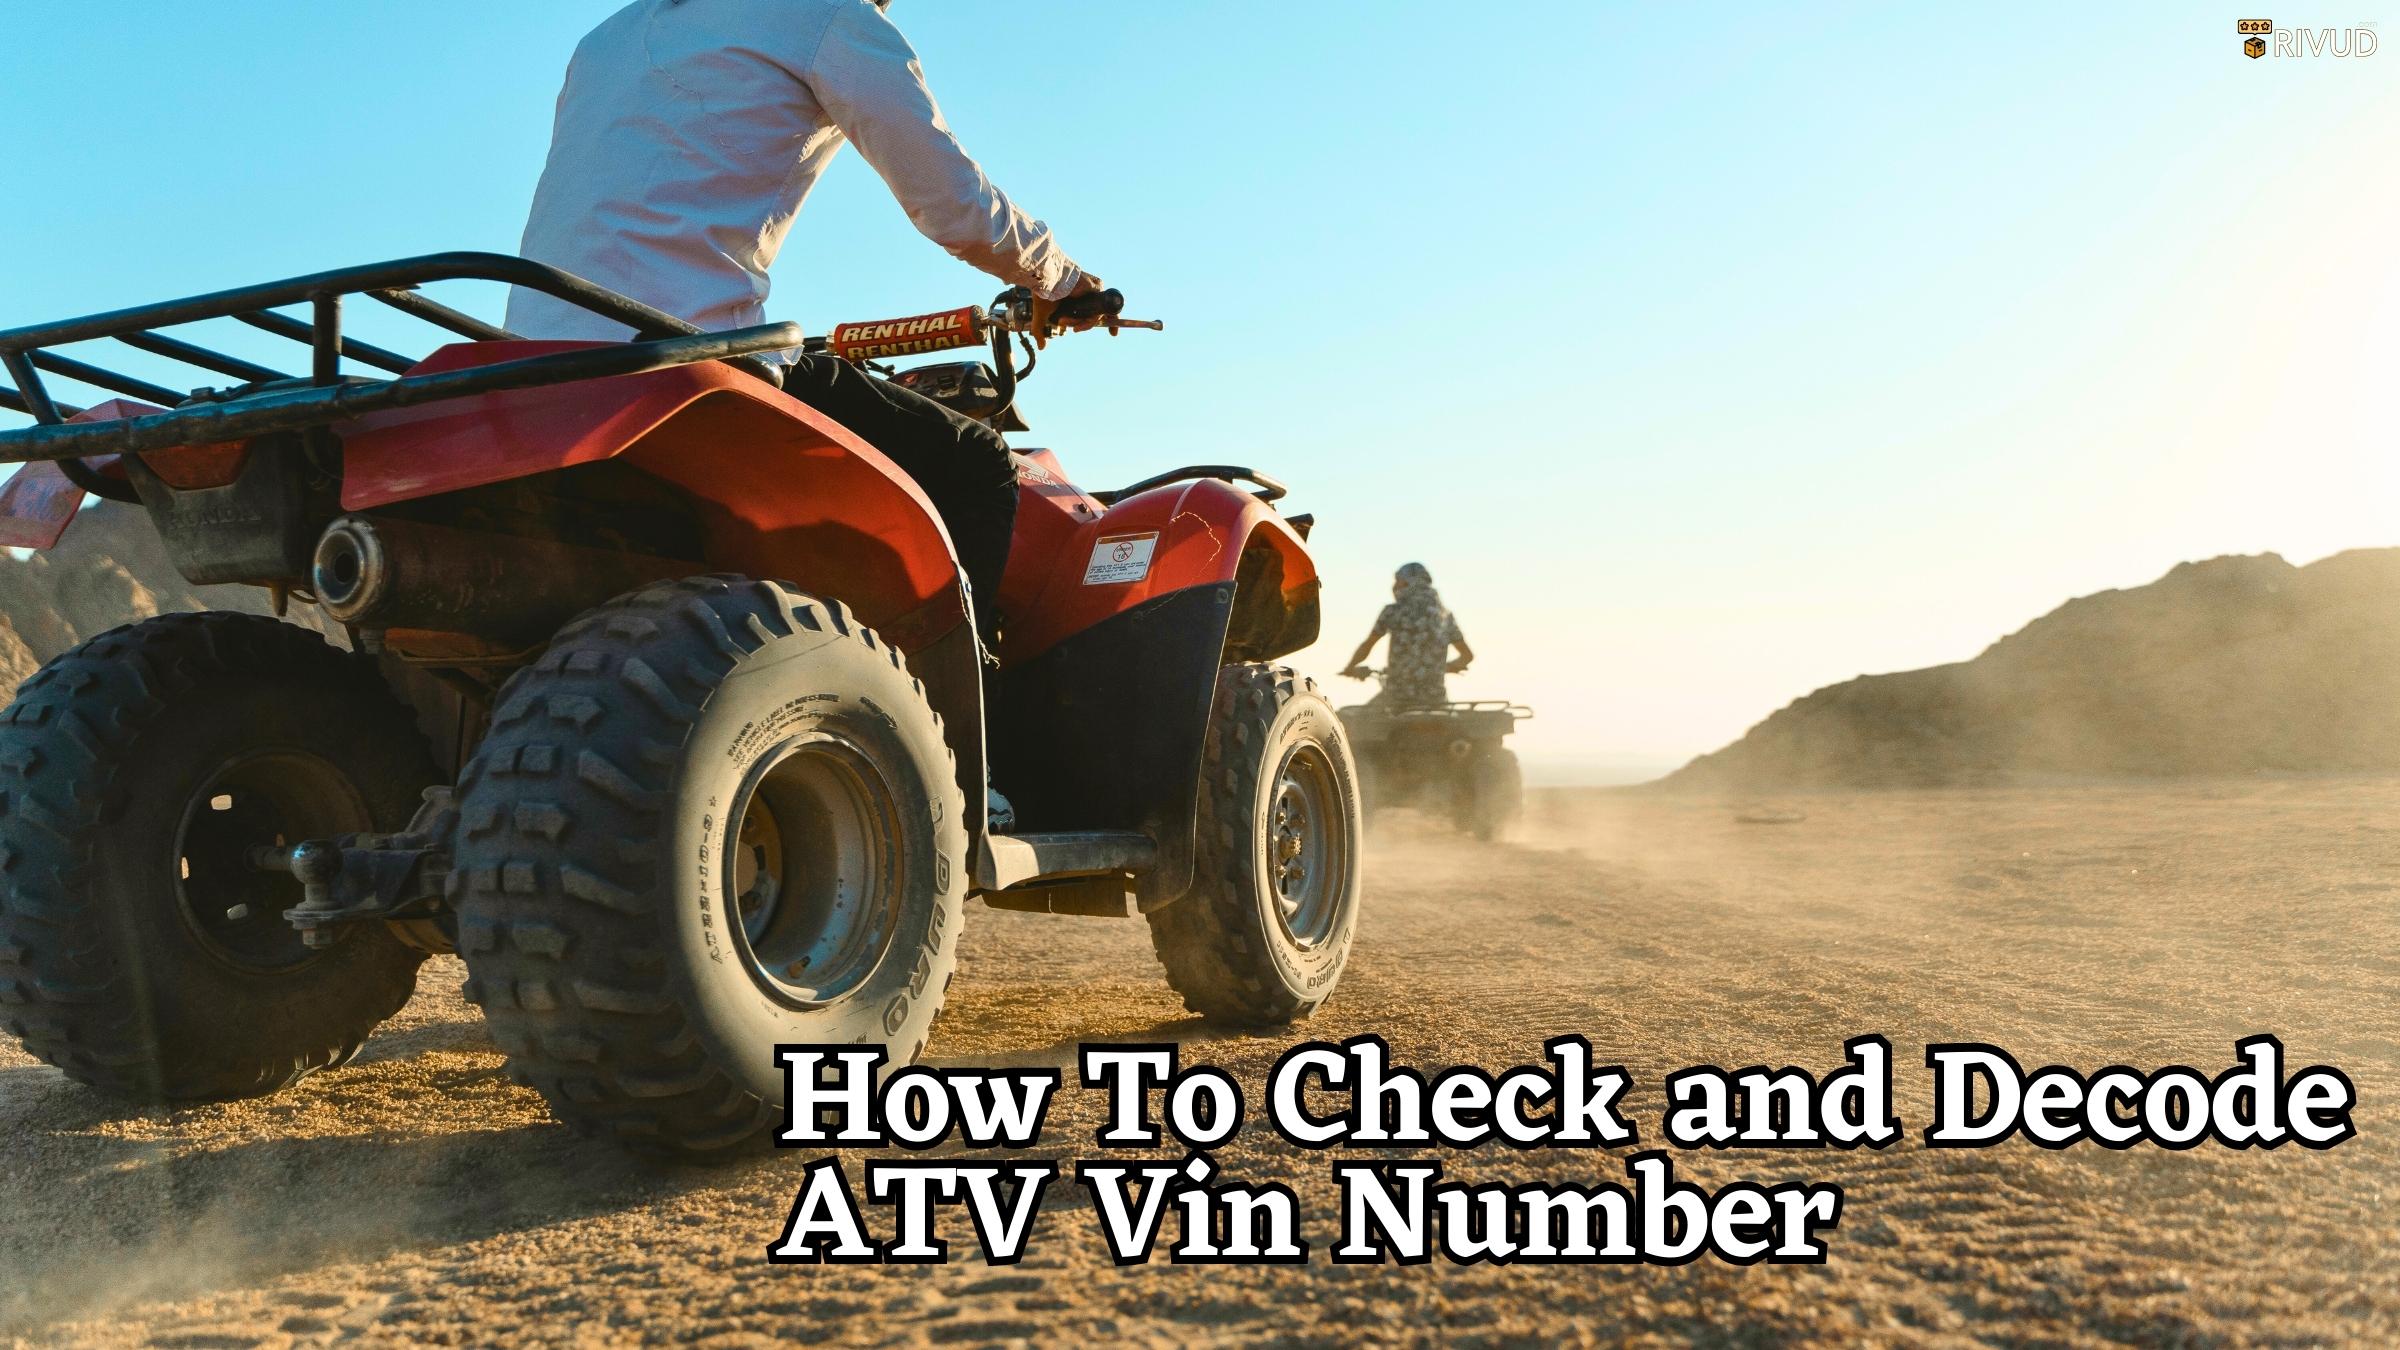 Atv Vin Number: How To Check And Decode